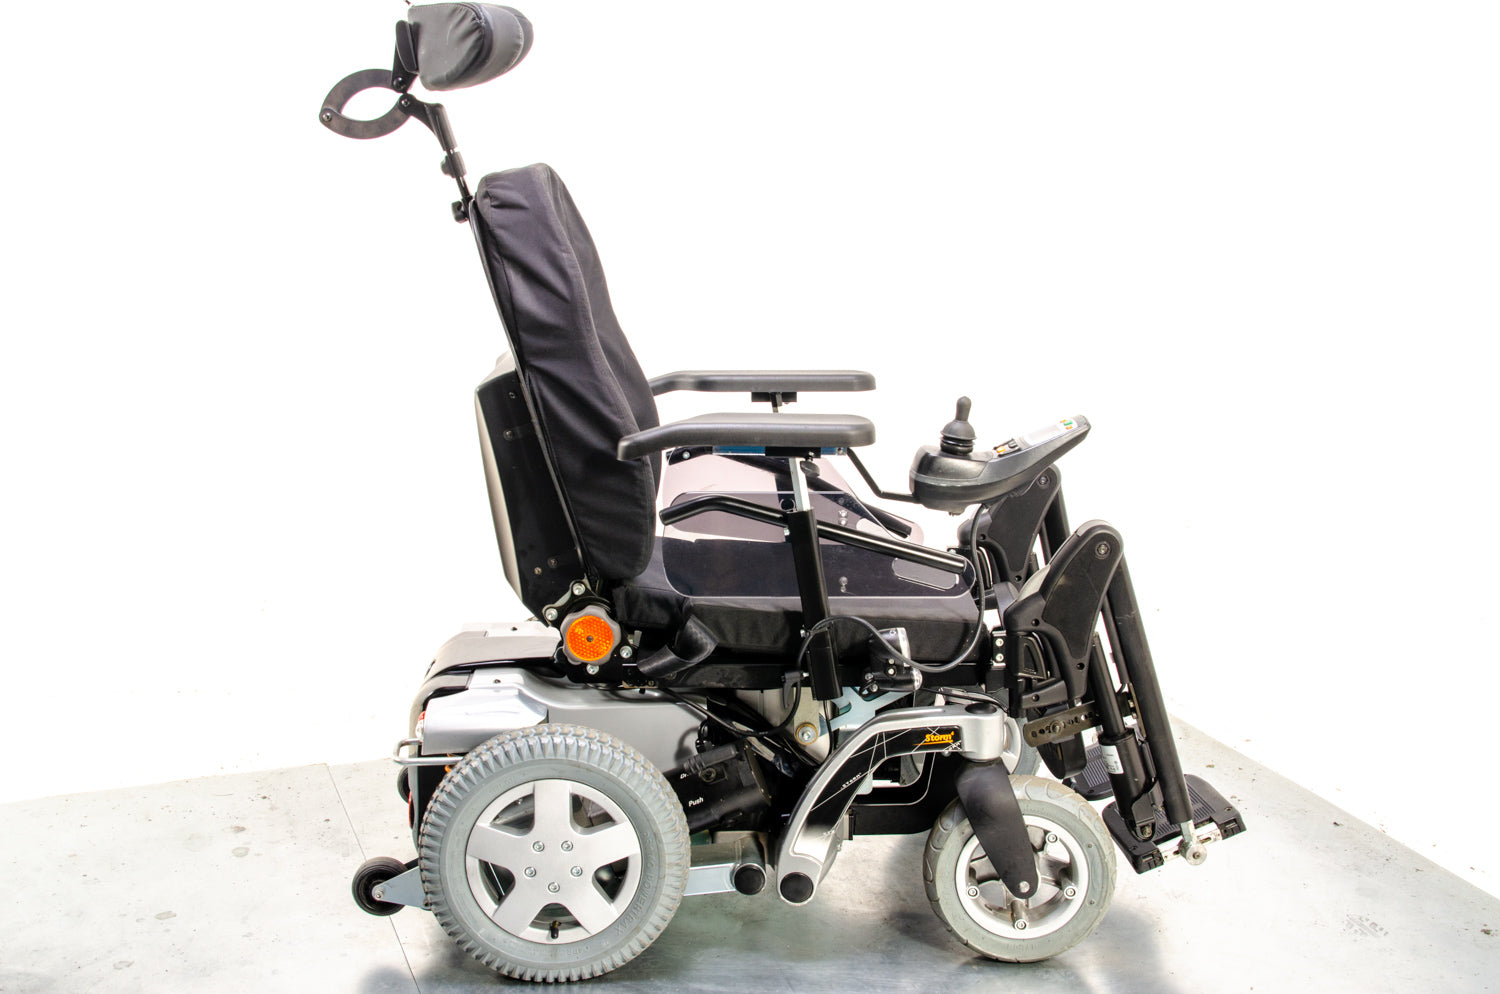 Invacare Storm 4 Electric Wheelchair Powerchair Power Riser Tilt Elevating Leg Rests Used Second Hand 13543